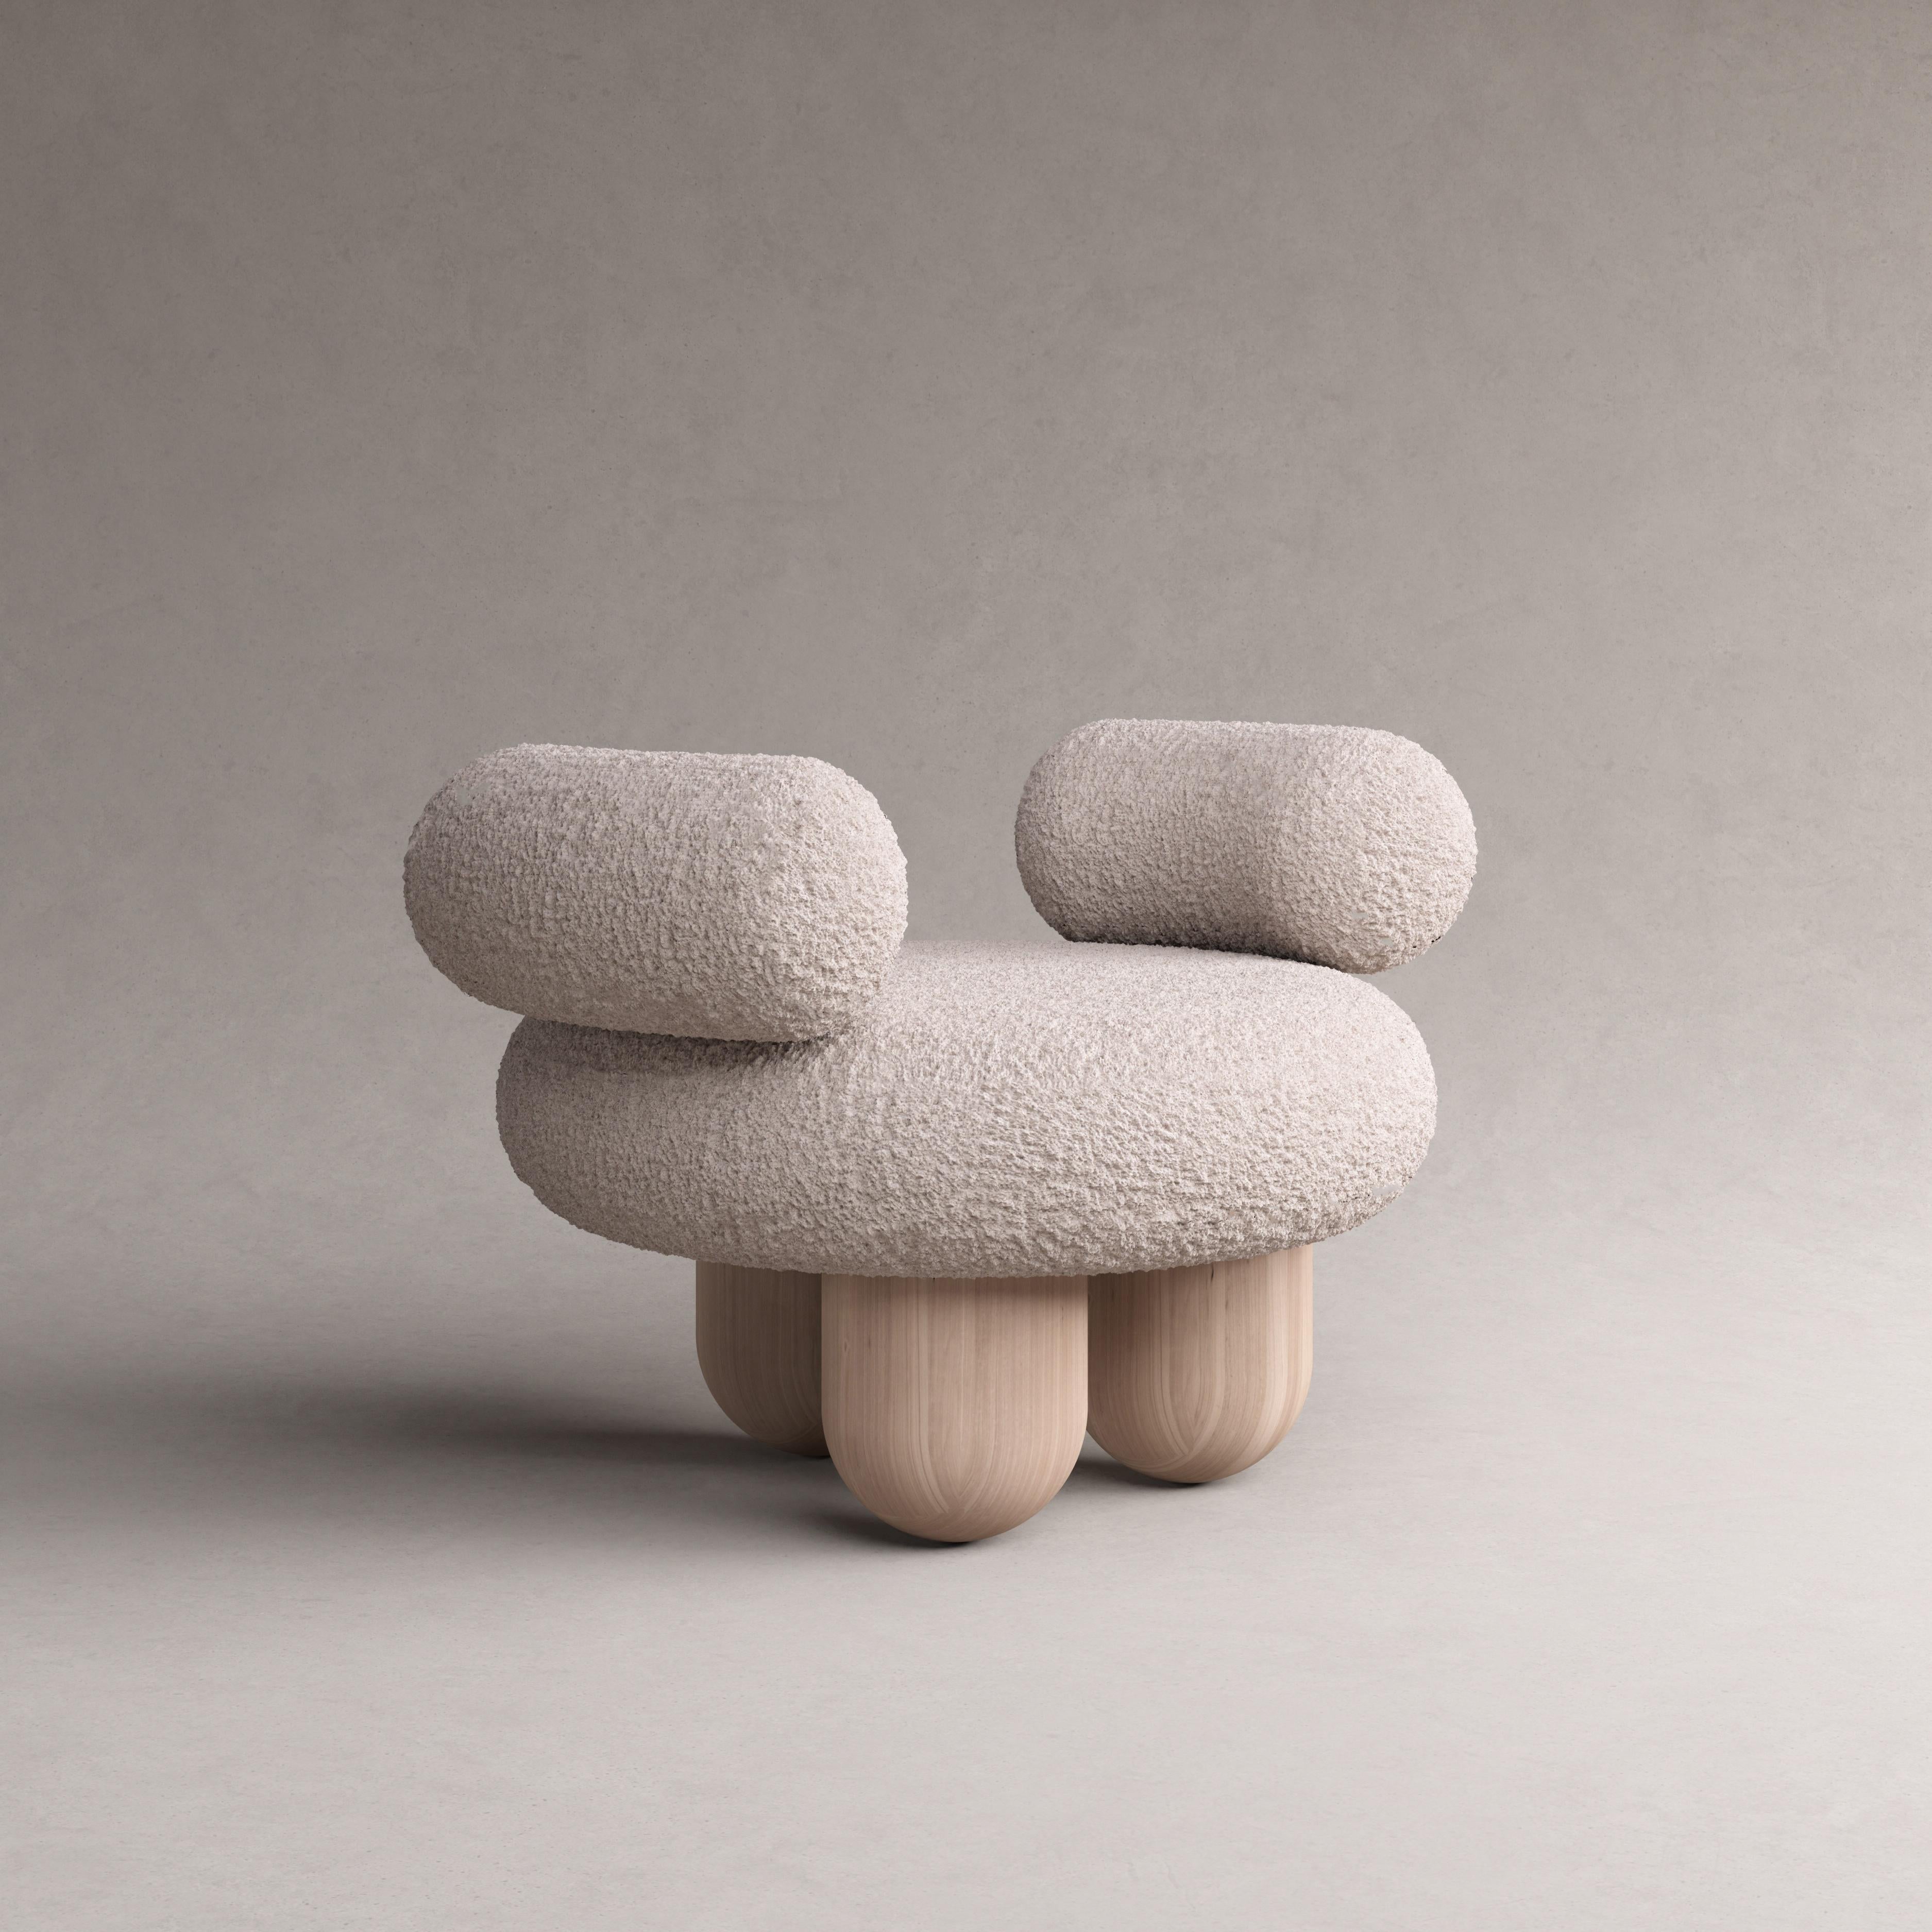 Bling Bling ottoman by Pietro Franceschini
Sold exclusively by Galerie Philia
Manufacturer: Stefano Minotti
Dimensions: W 79 x H 43-63 cm
Materials: Lamb, ashwood
Also available in Bouclé

Pietro Franceschini is an architect and designer